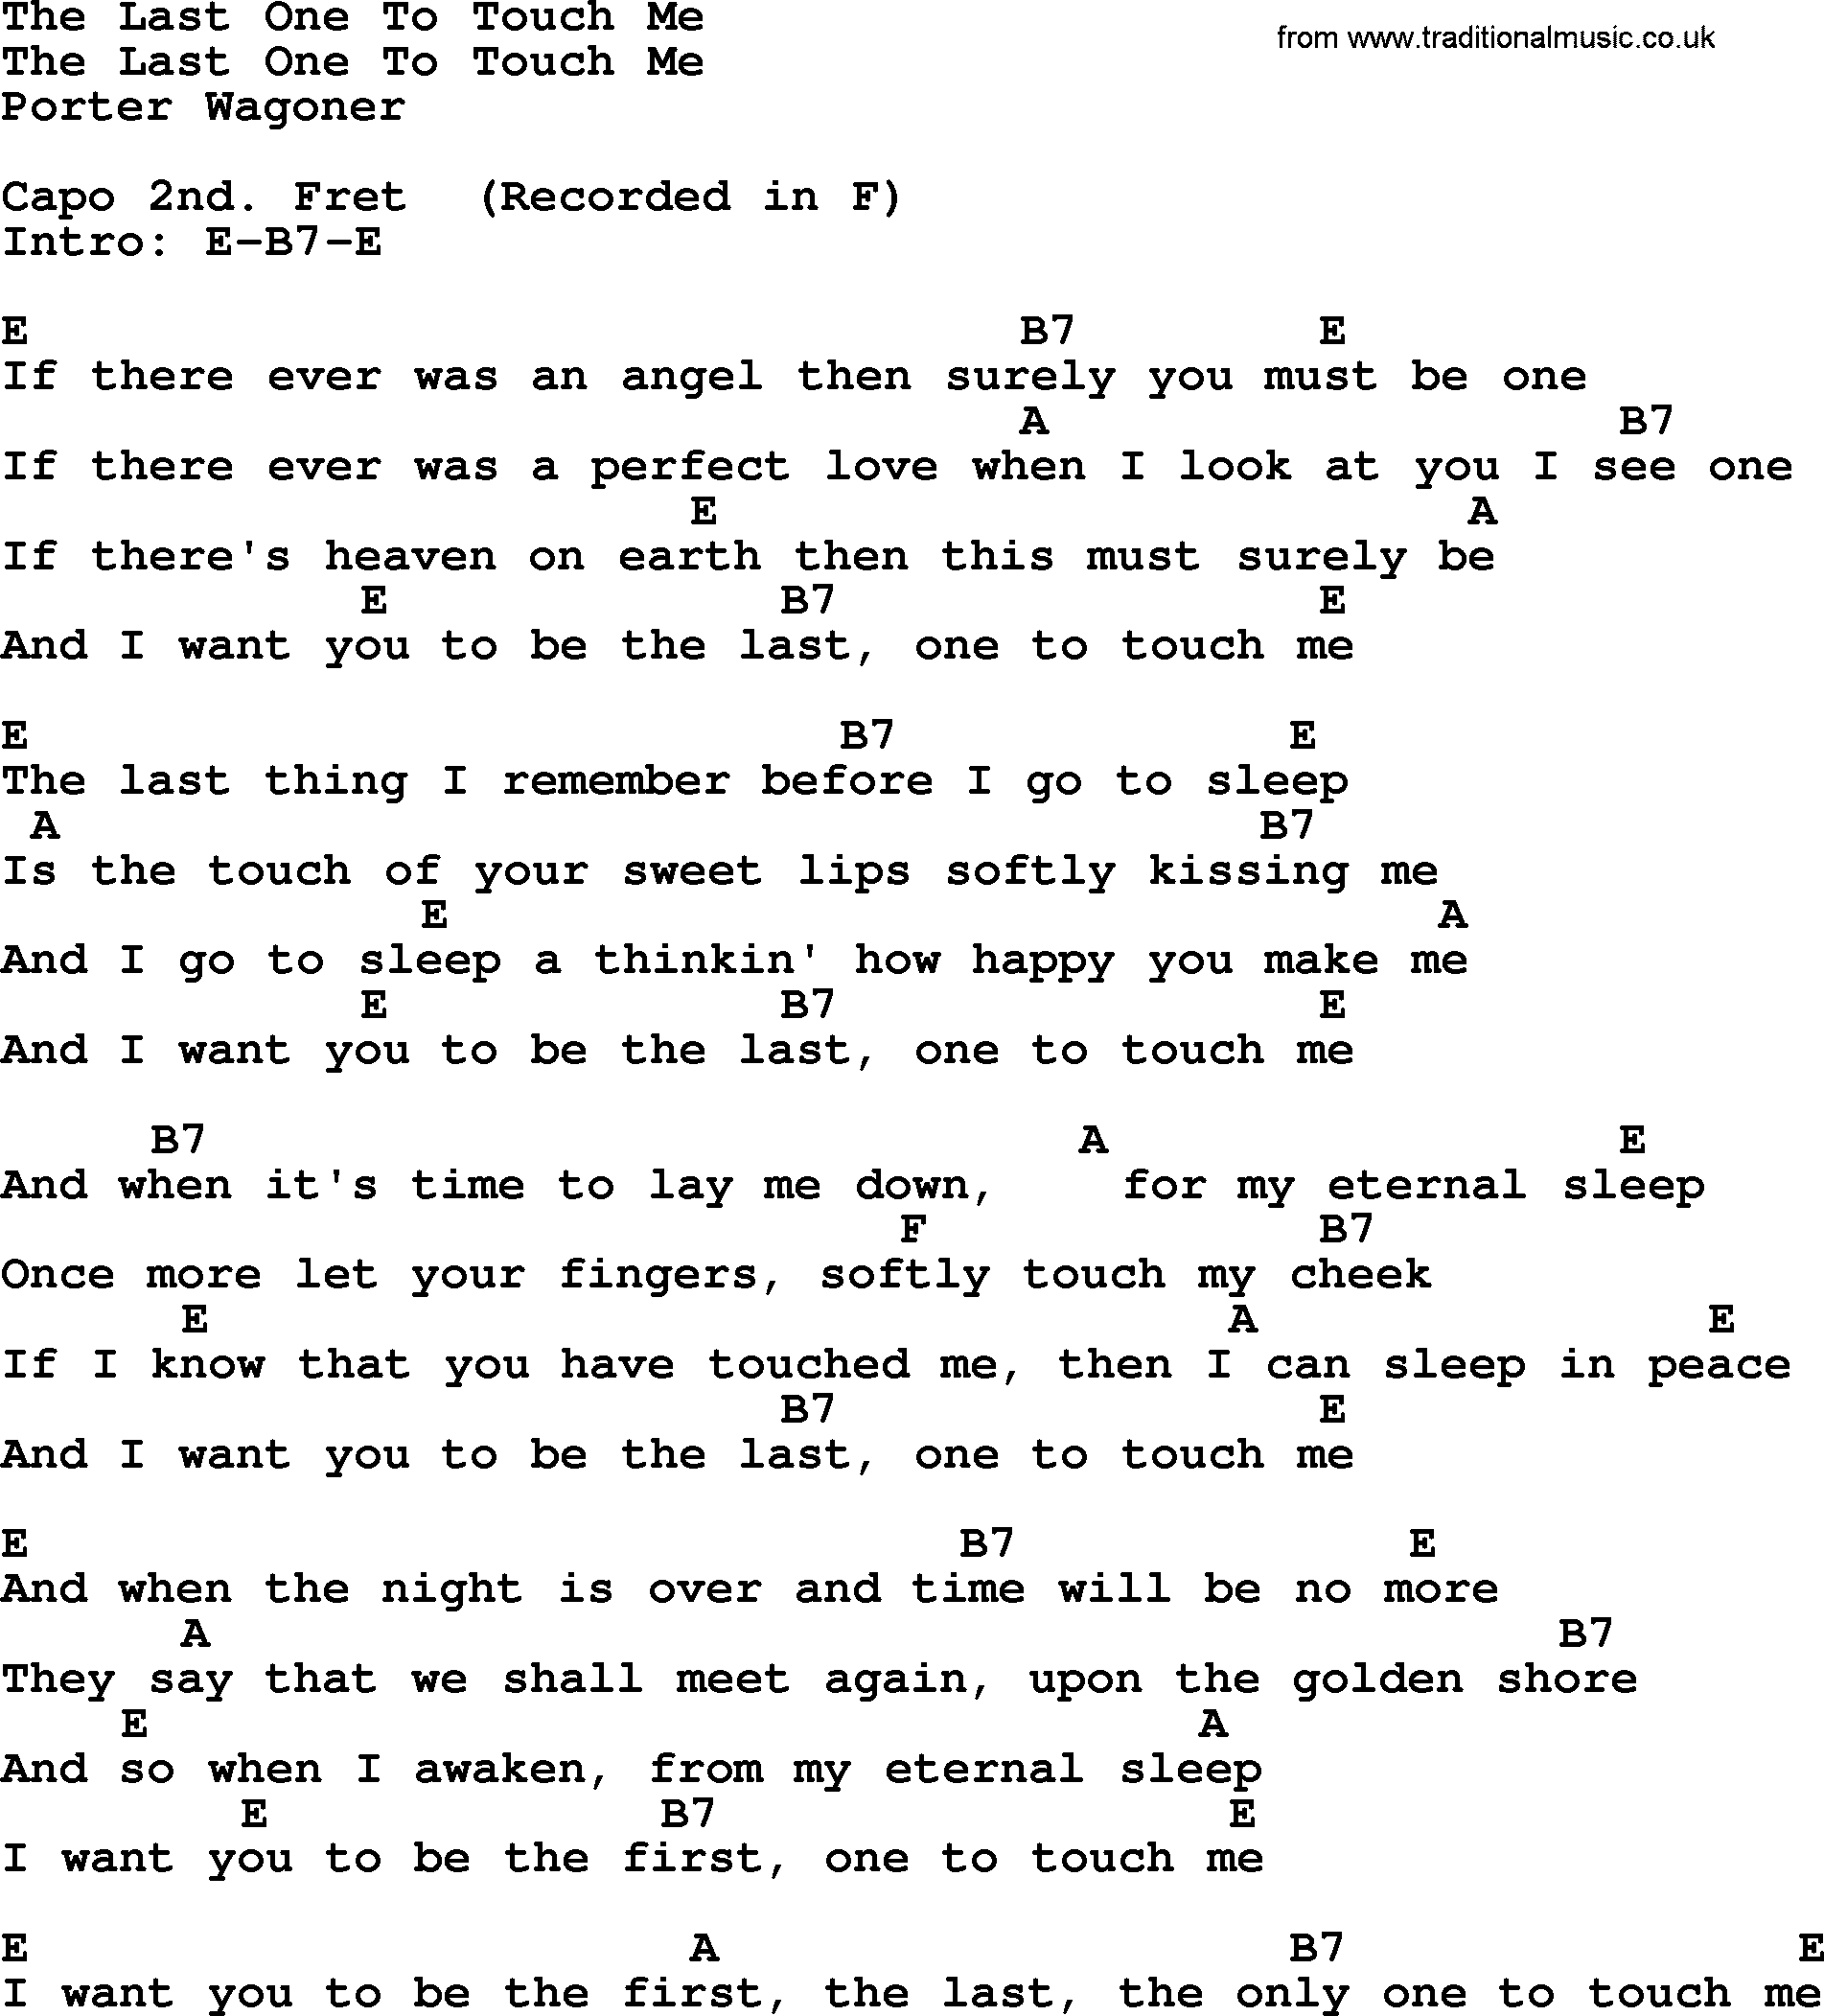 Bluegrass song: The Last One To Touch Me, lyrics and chords